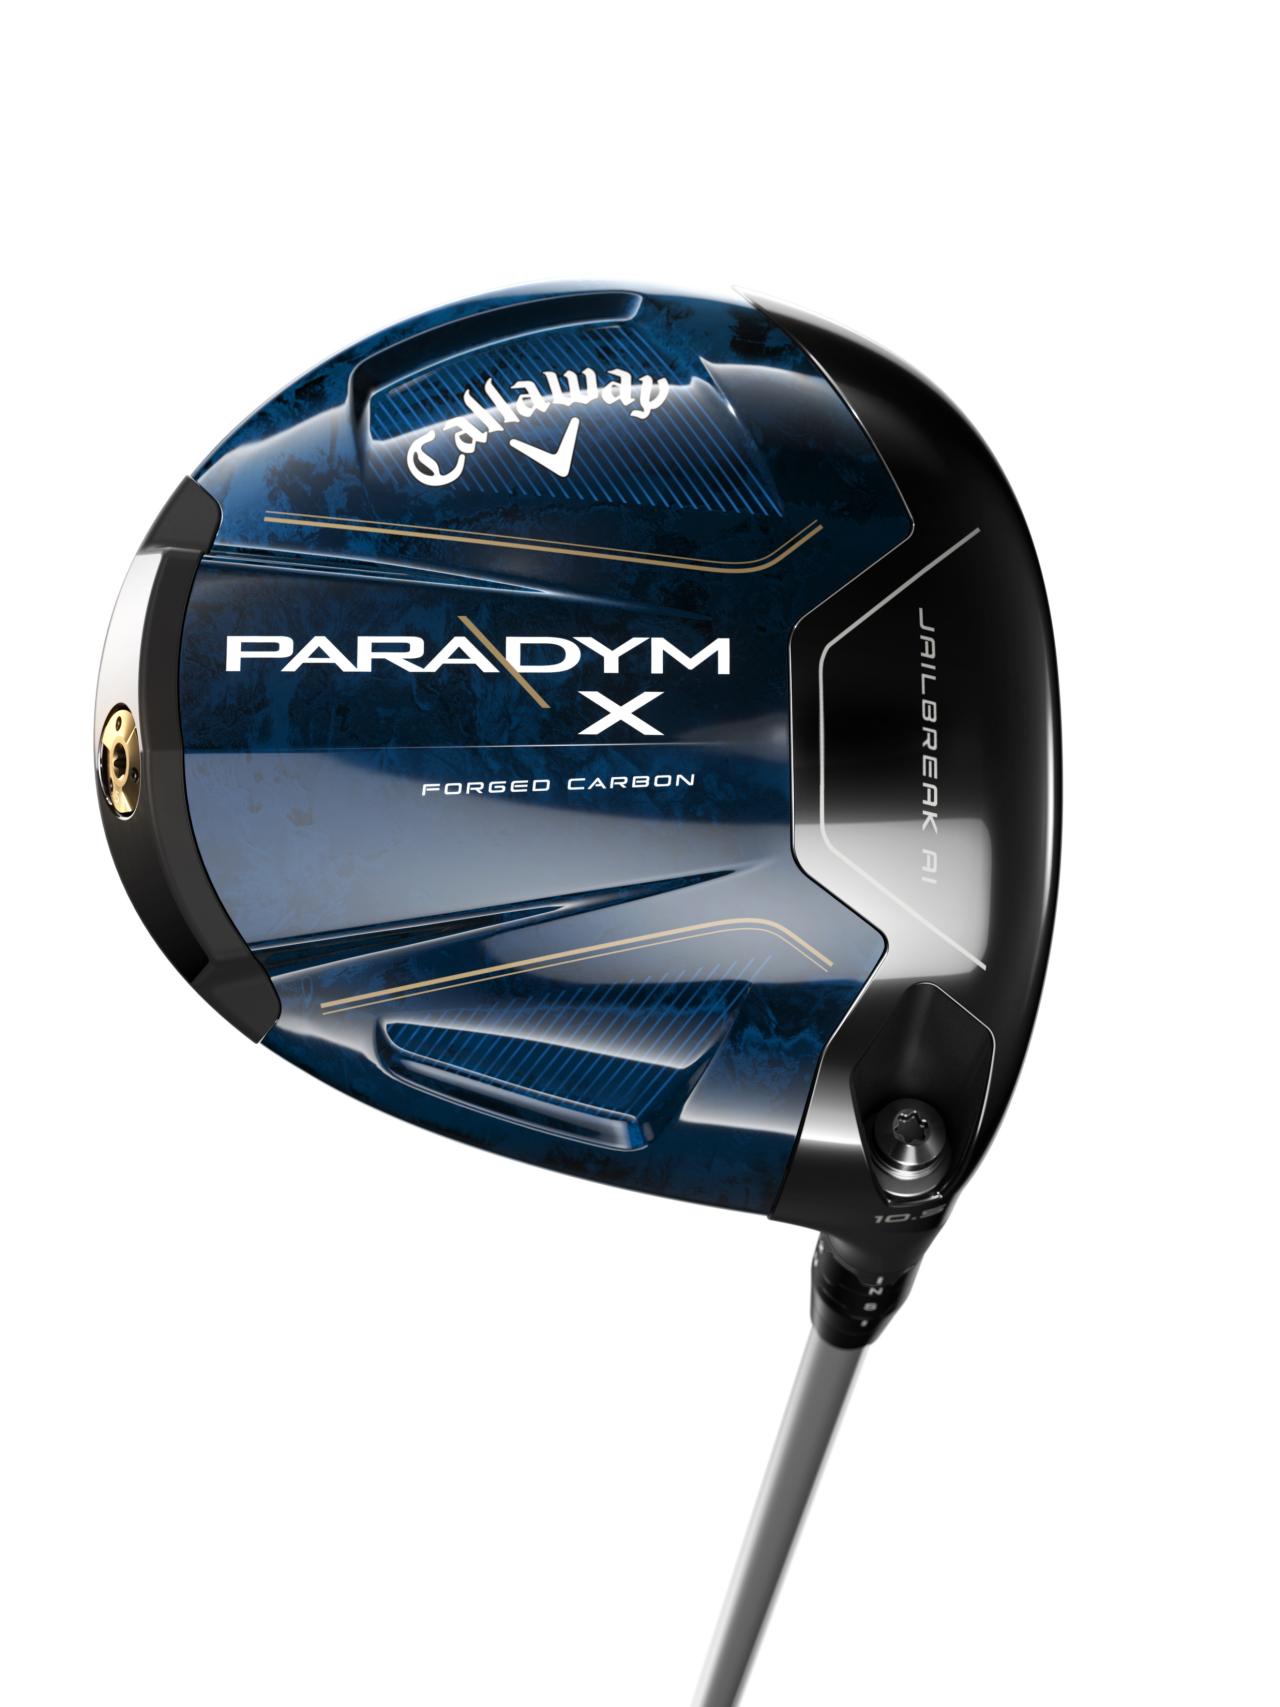 Callaway Paradym drivers: What you need to know | Golf Equipment